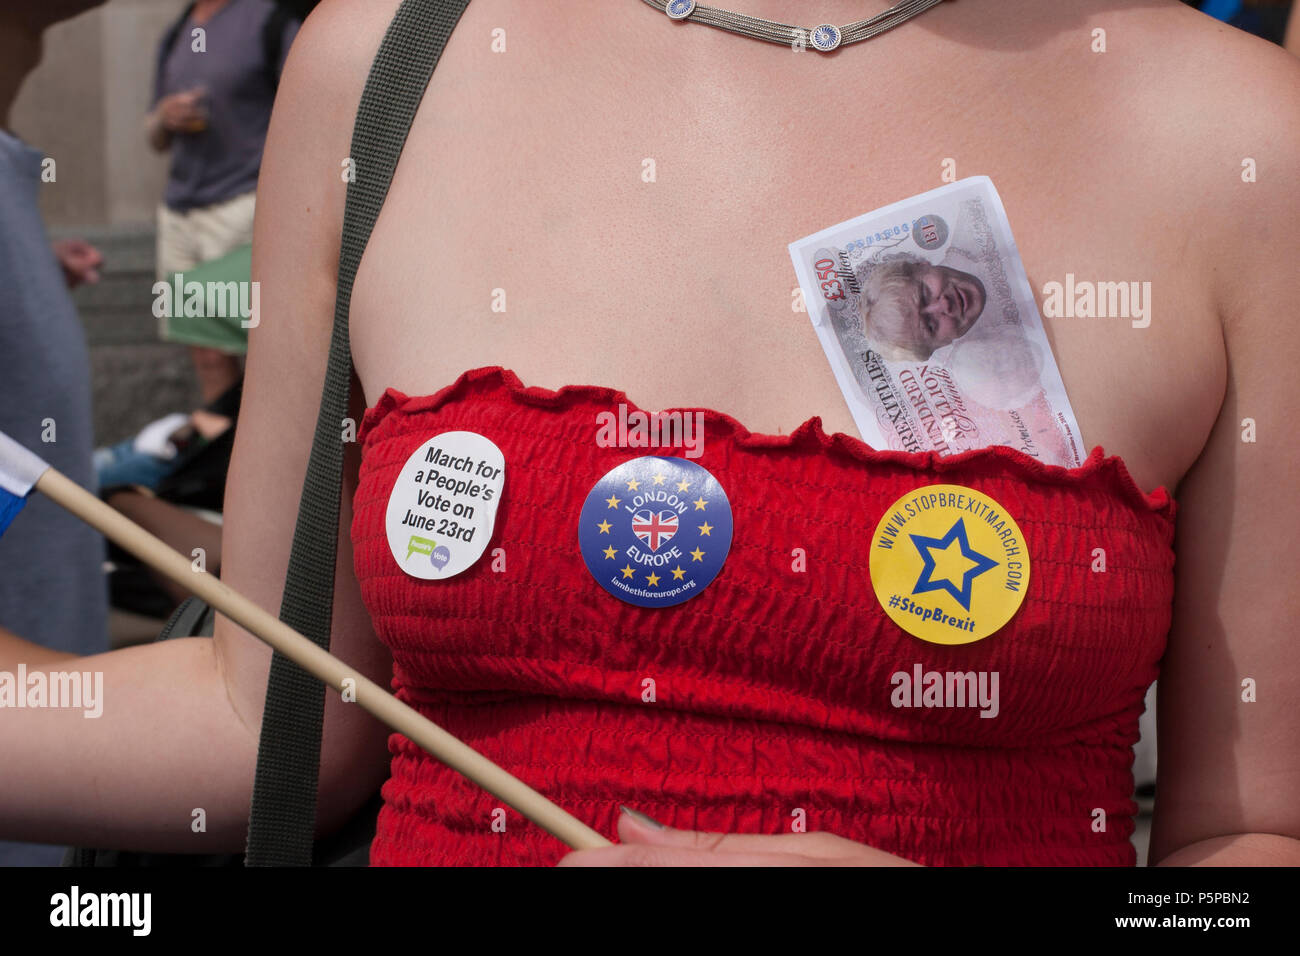 People's Vote March, London, UK, 23rd June 2018. Boris Johnson bank note: £350 million, and stickers. Stock Photo